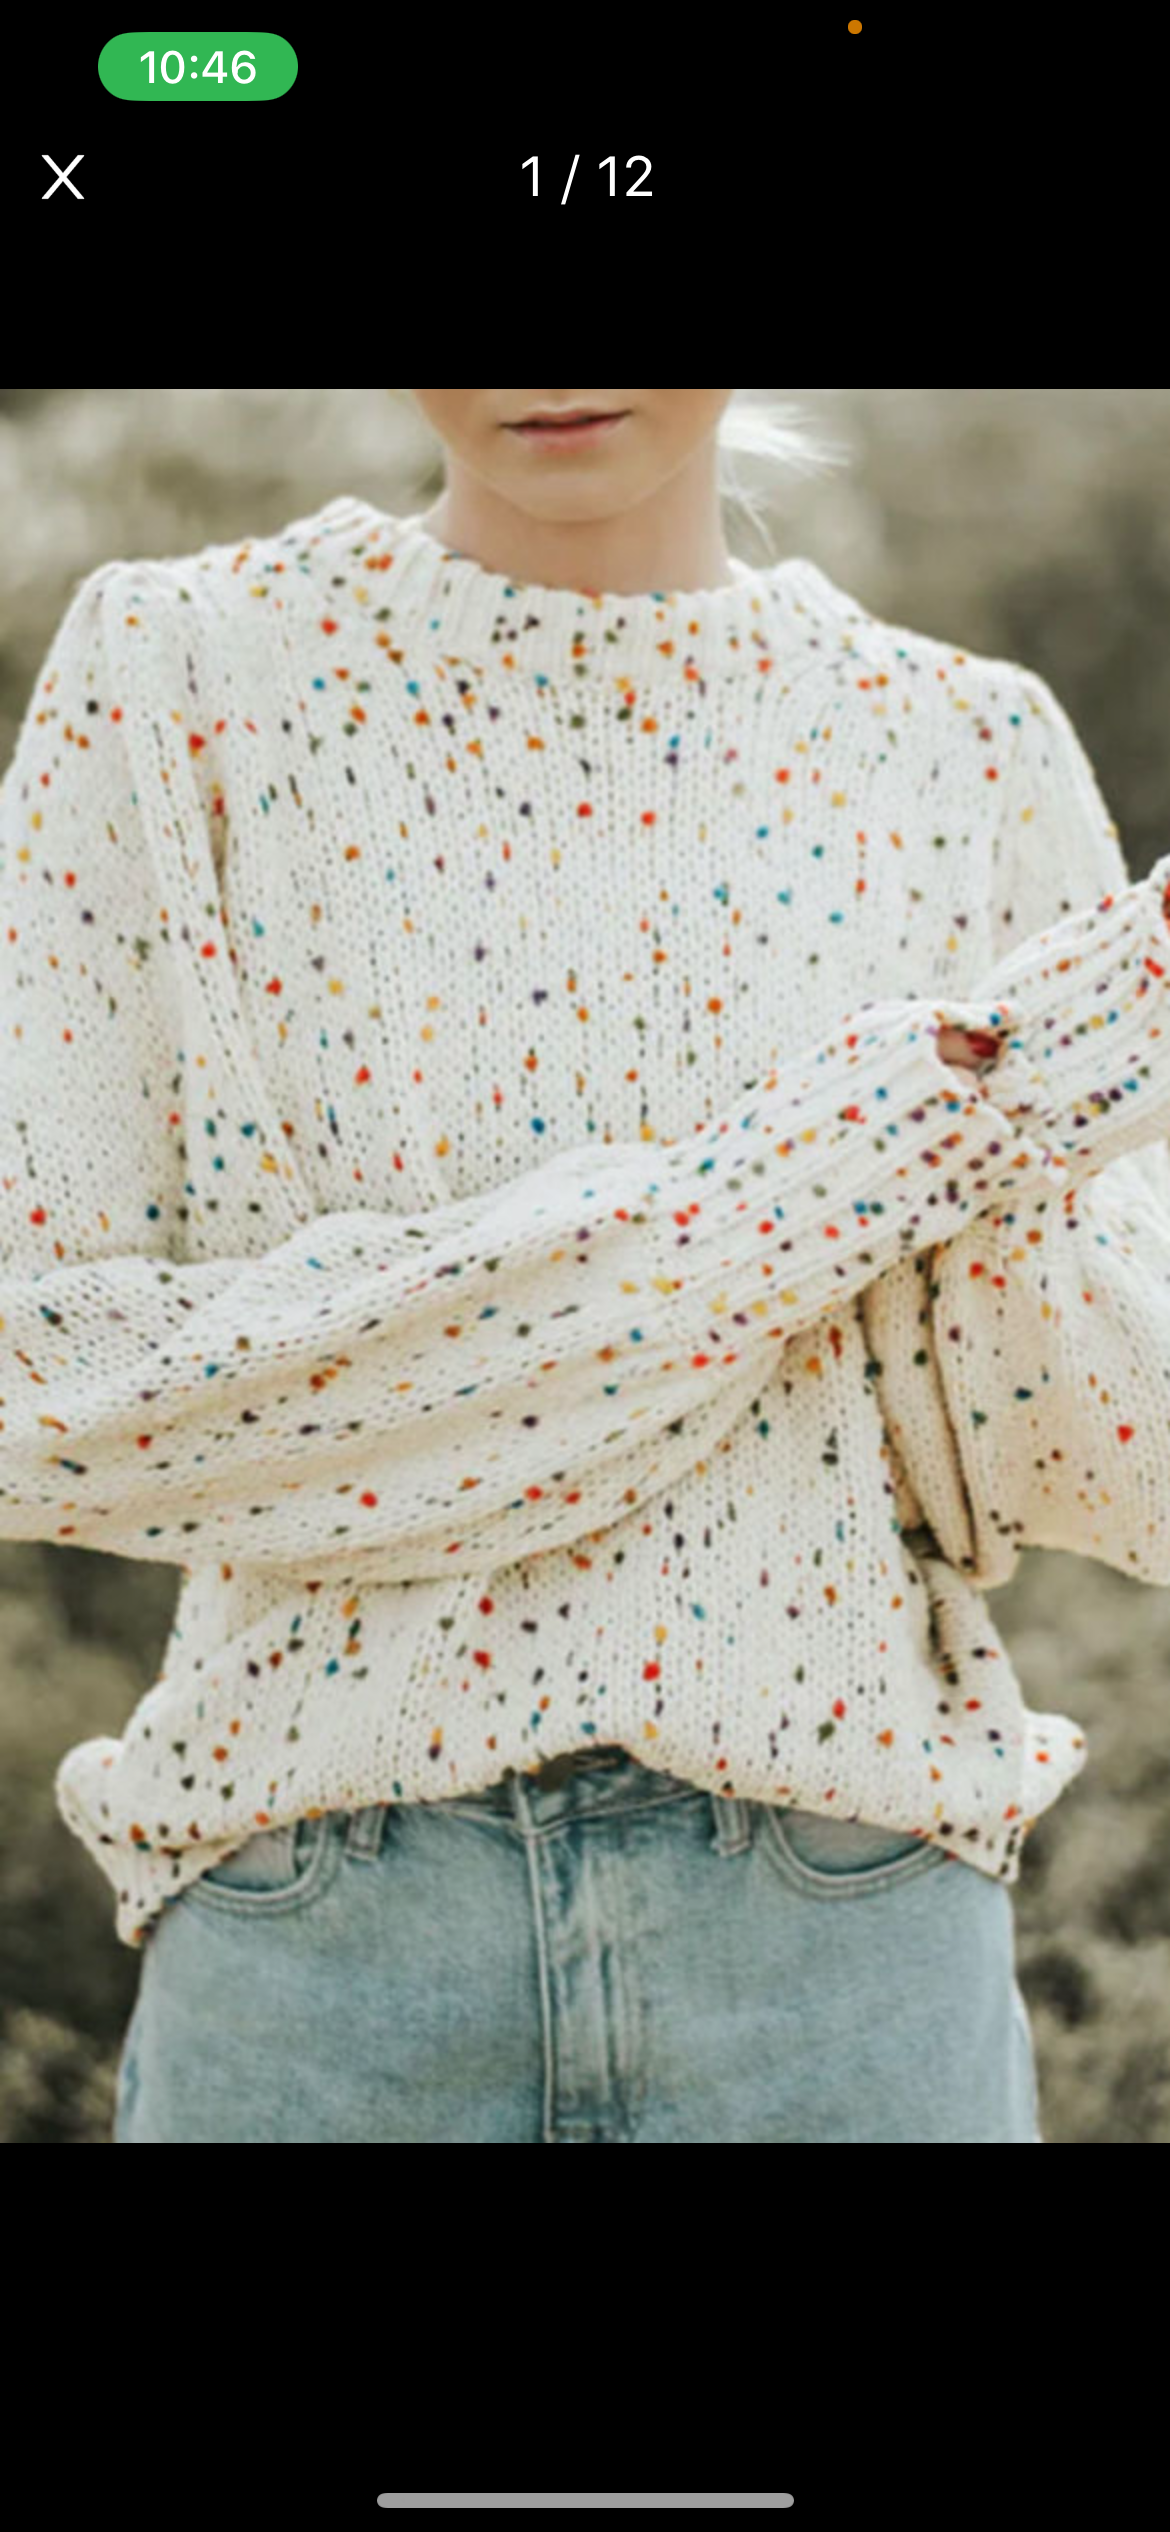 White Speckled Sweater was $39